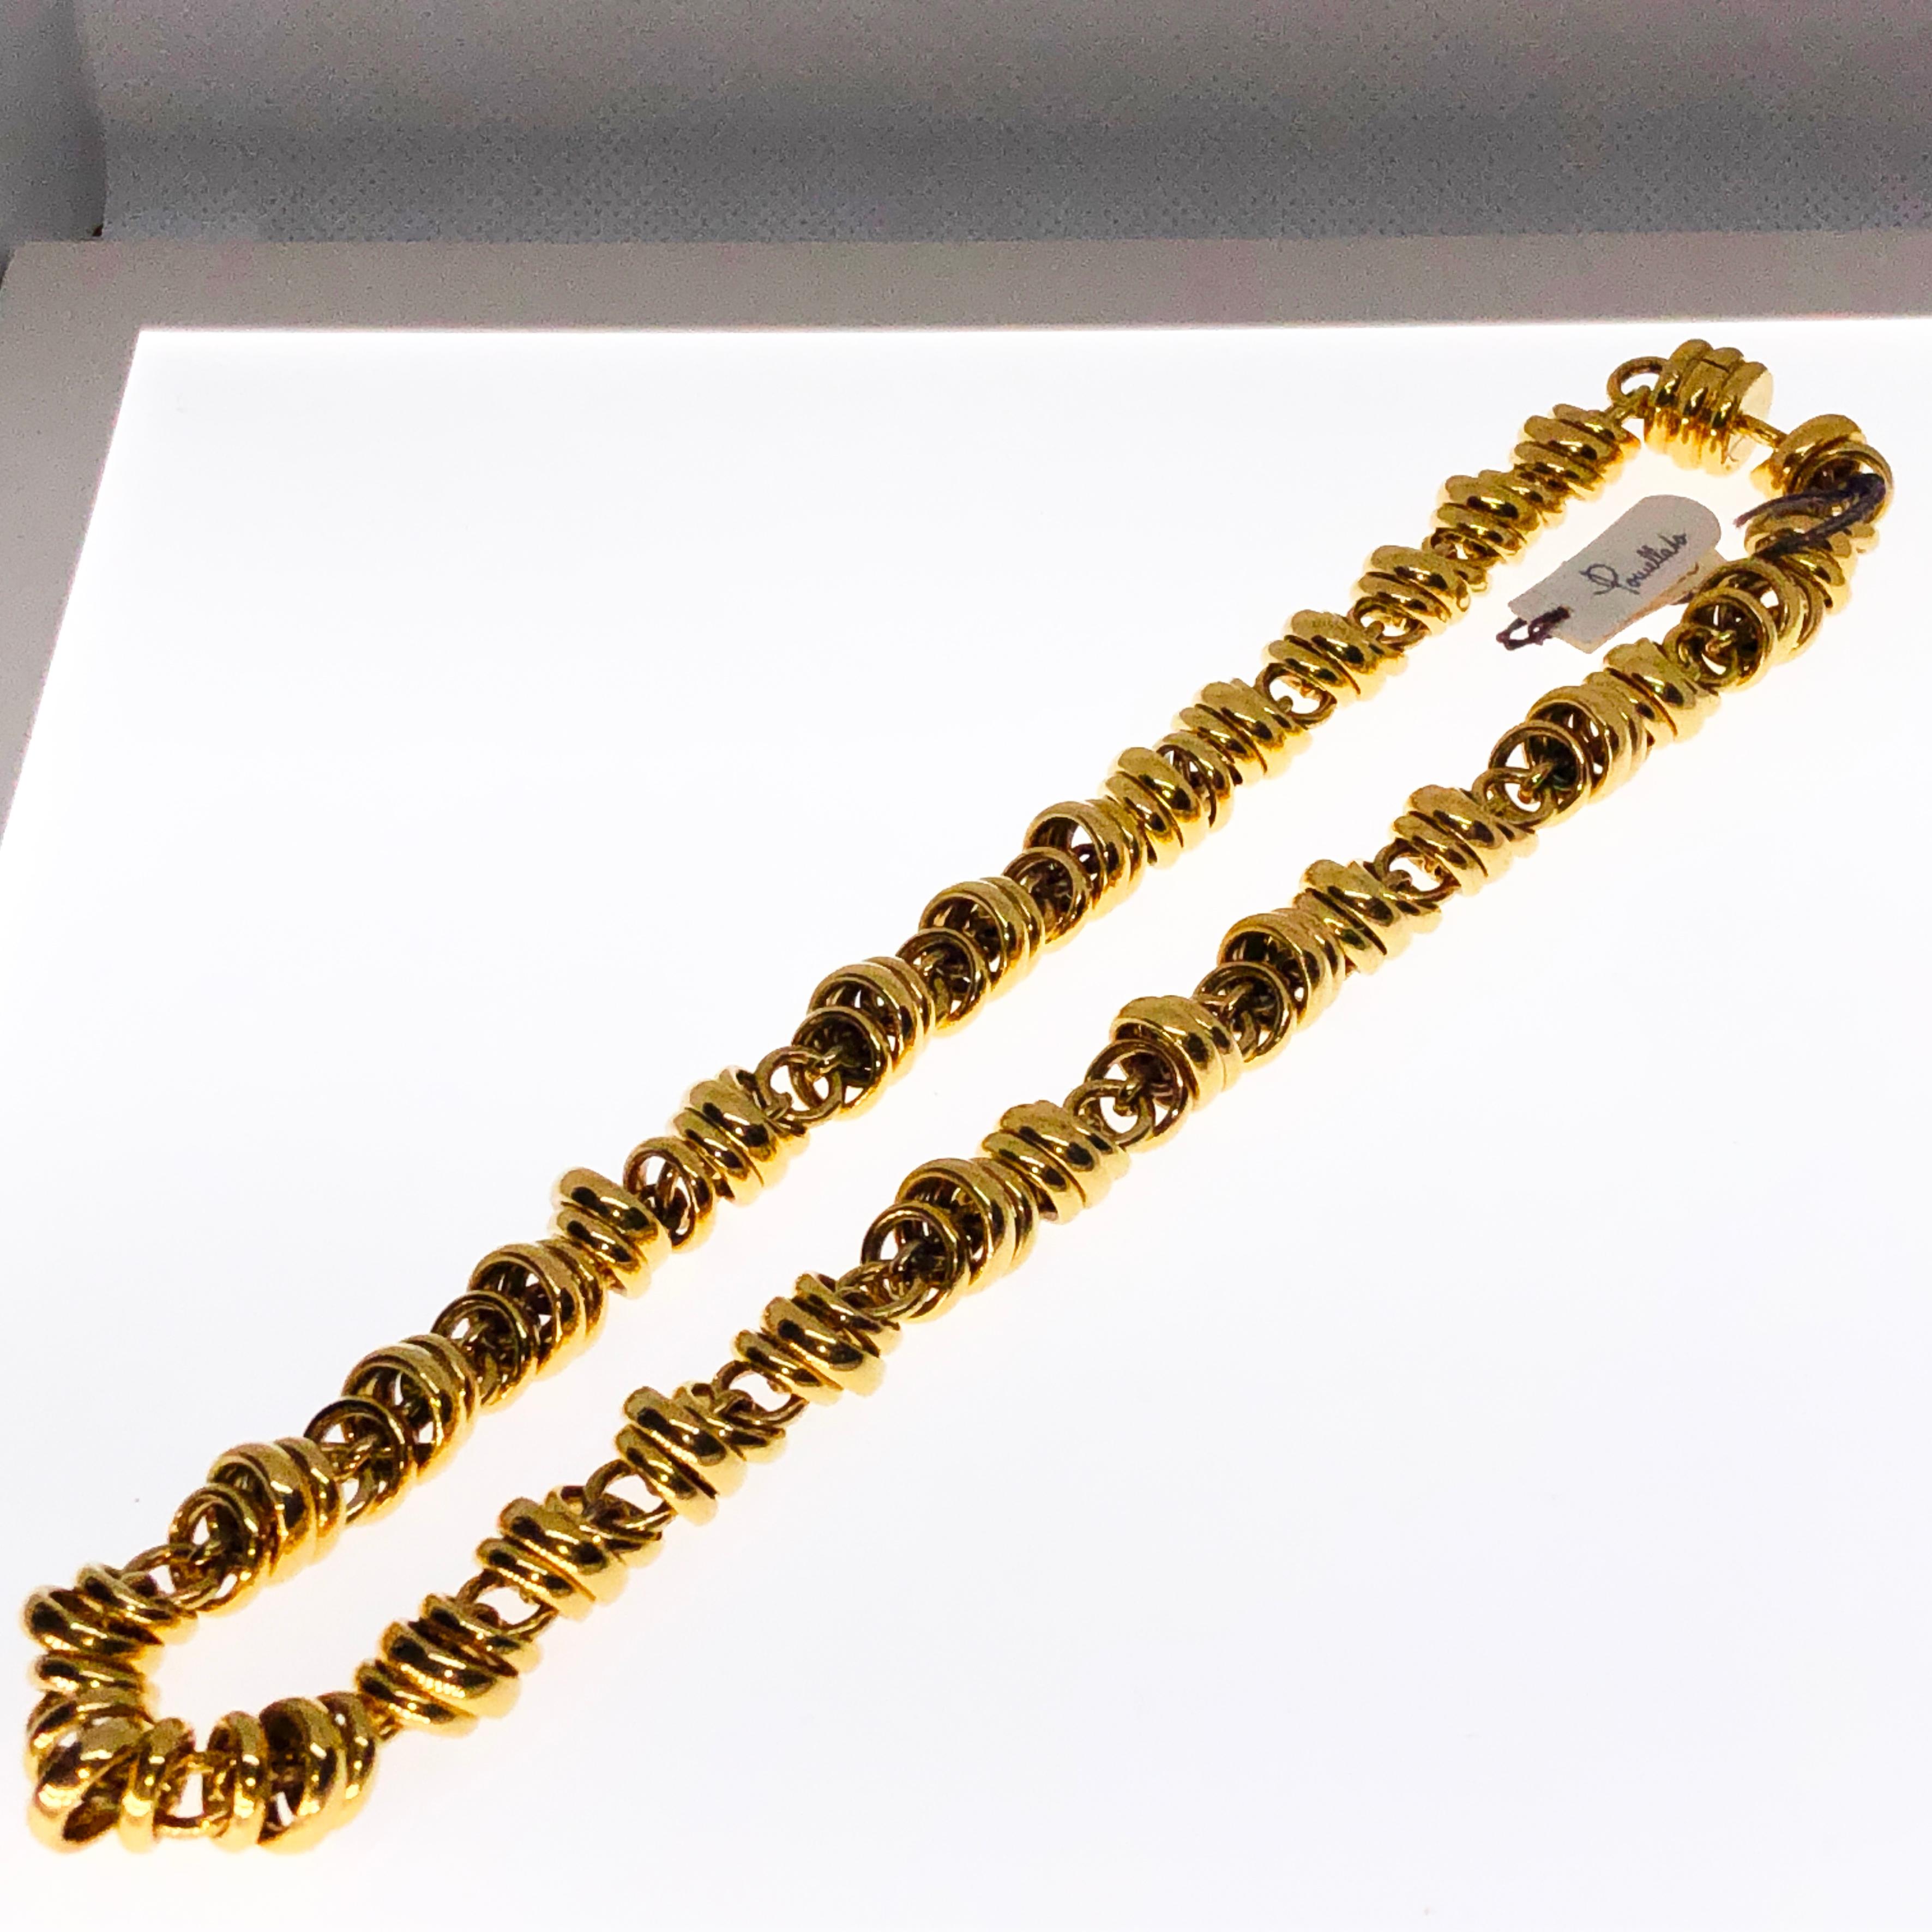 1988 Iconic Pomellato 18 Karat Solid Yellow Gold Chain Necklace 7